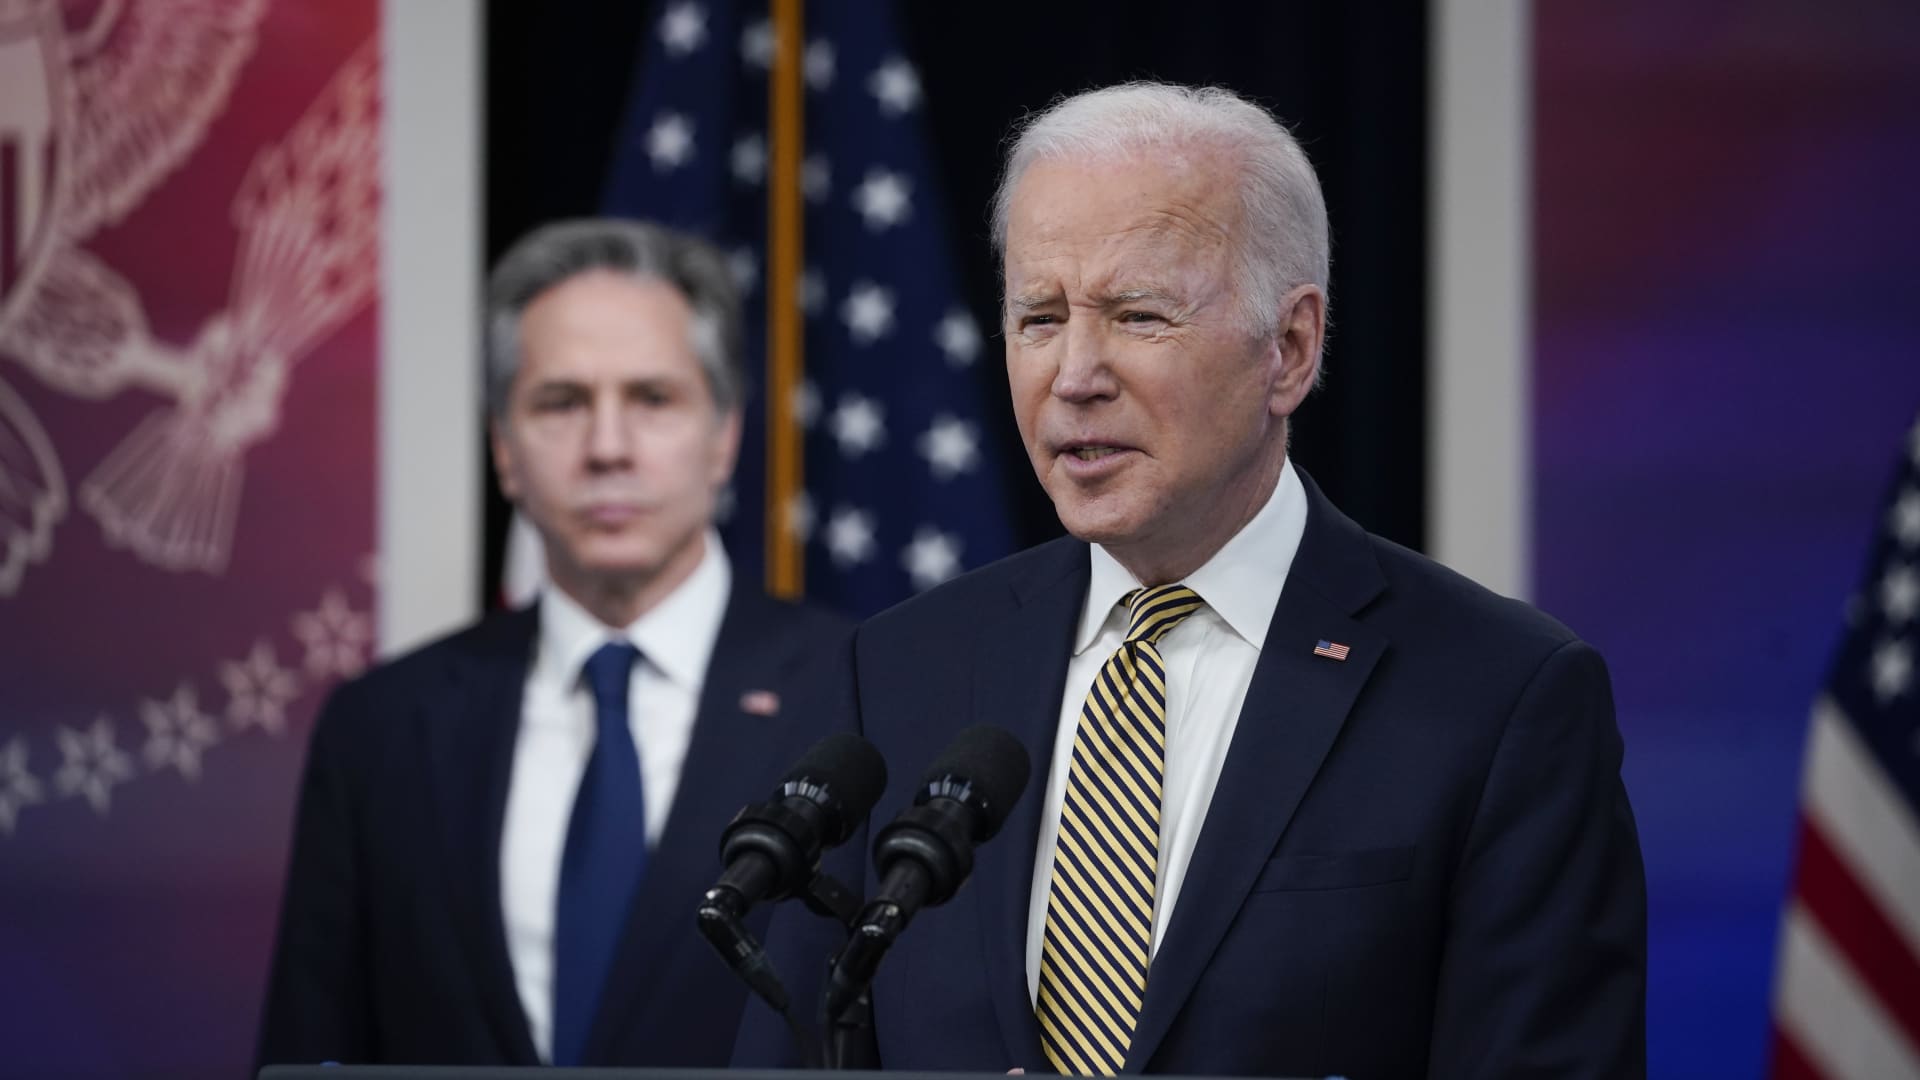 Biden details new aid to Ukraine, promises “more in the days and weeks ahead” to help combat Russia invasion